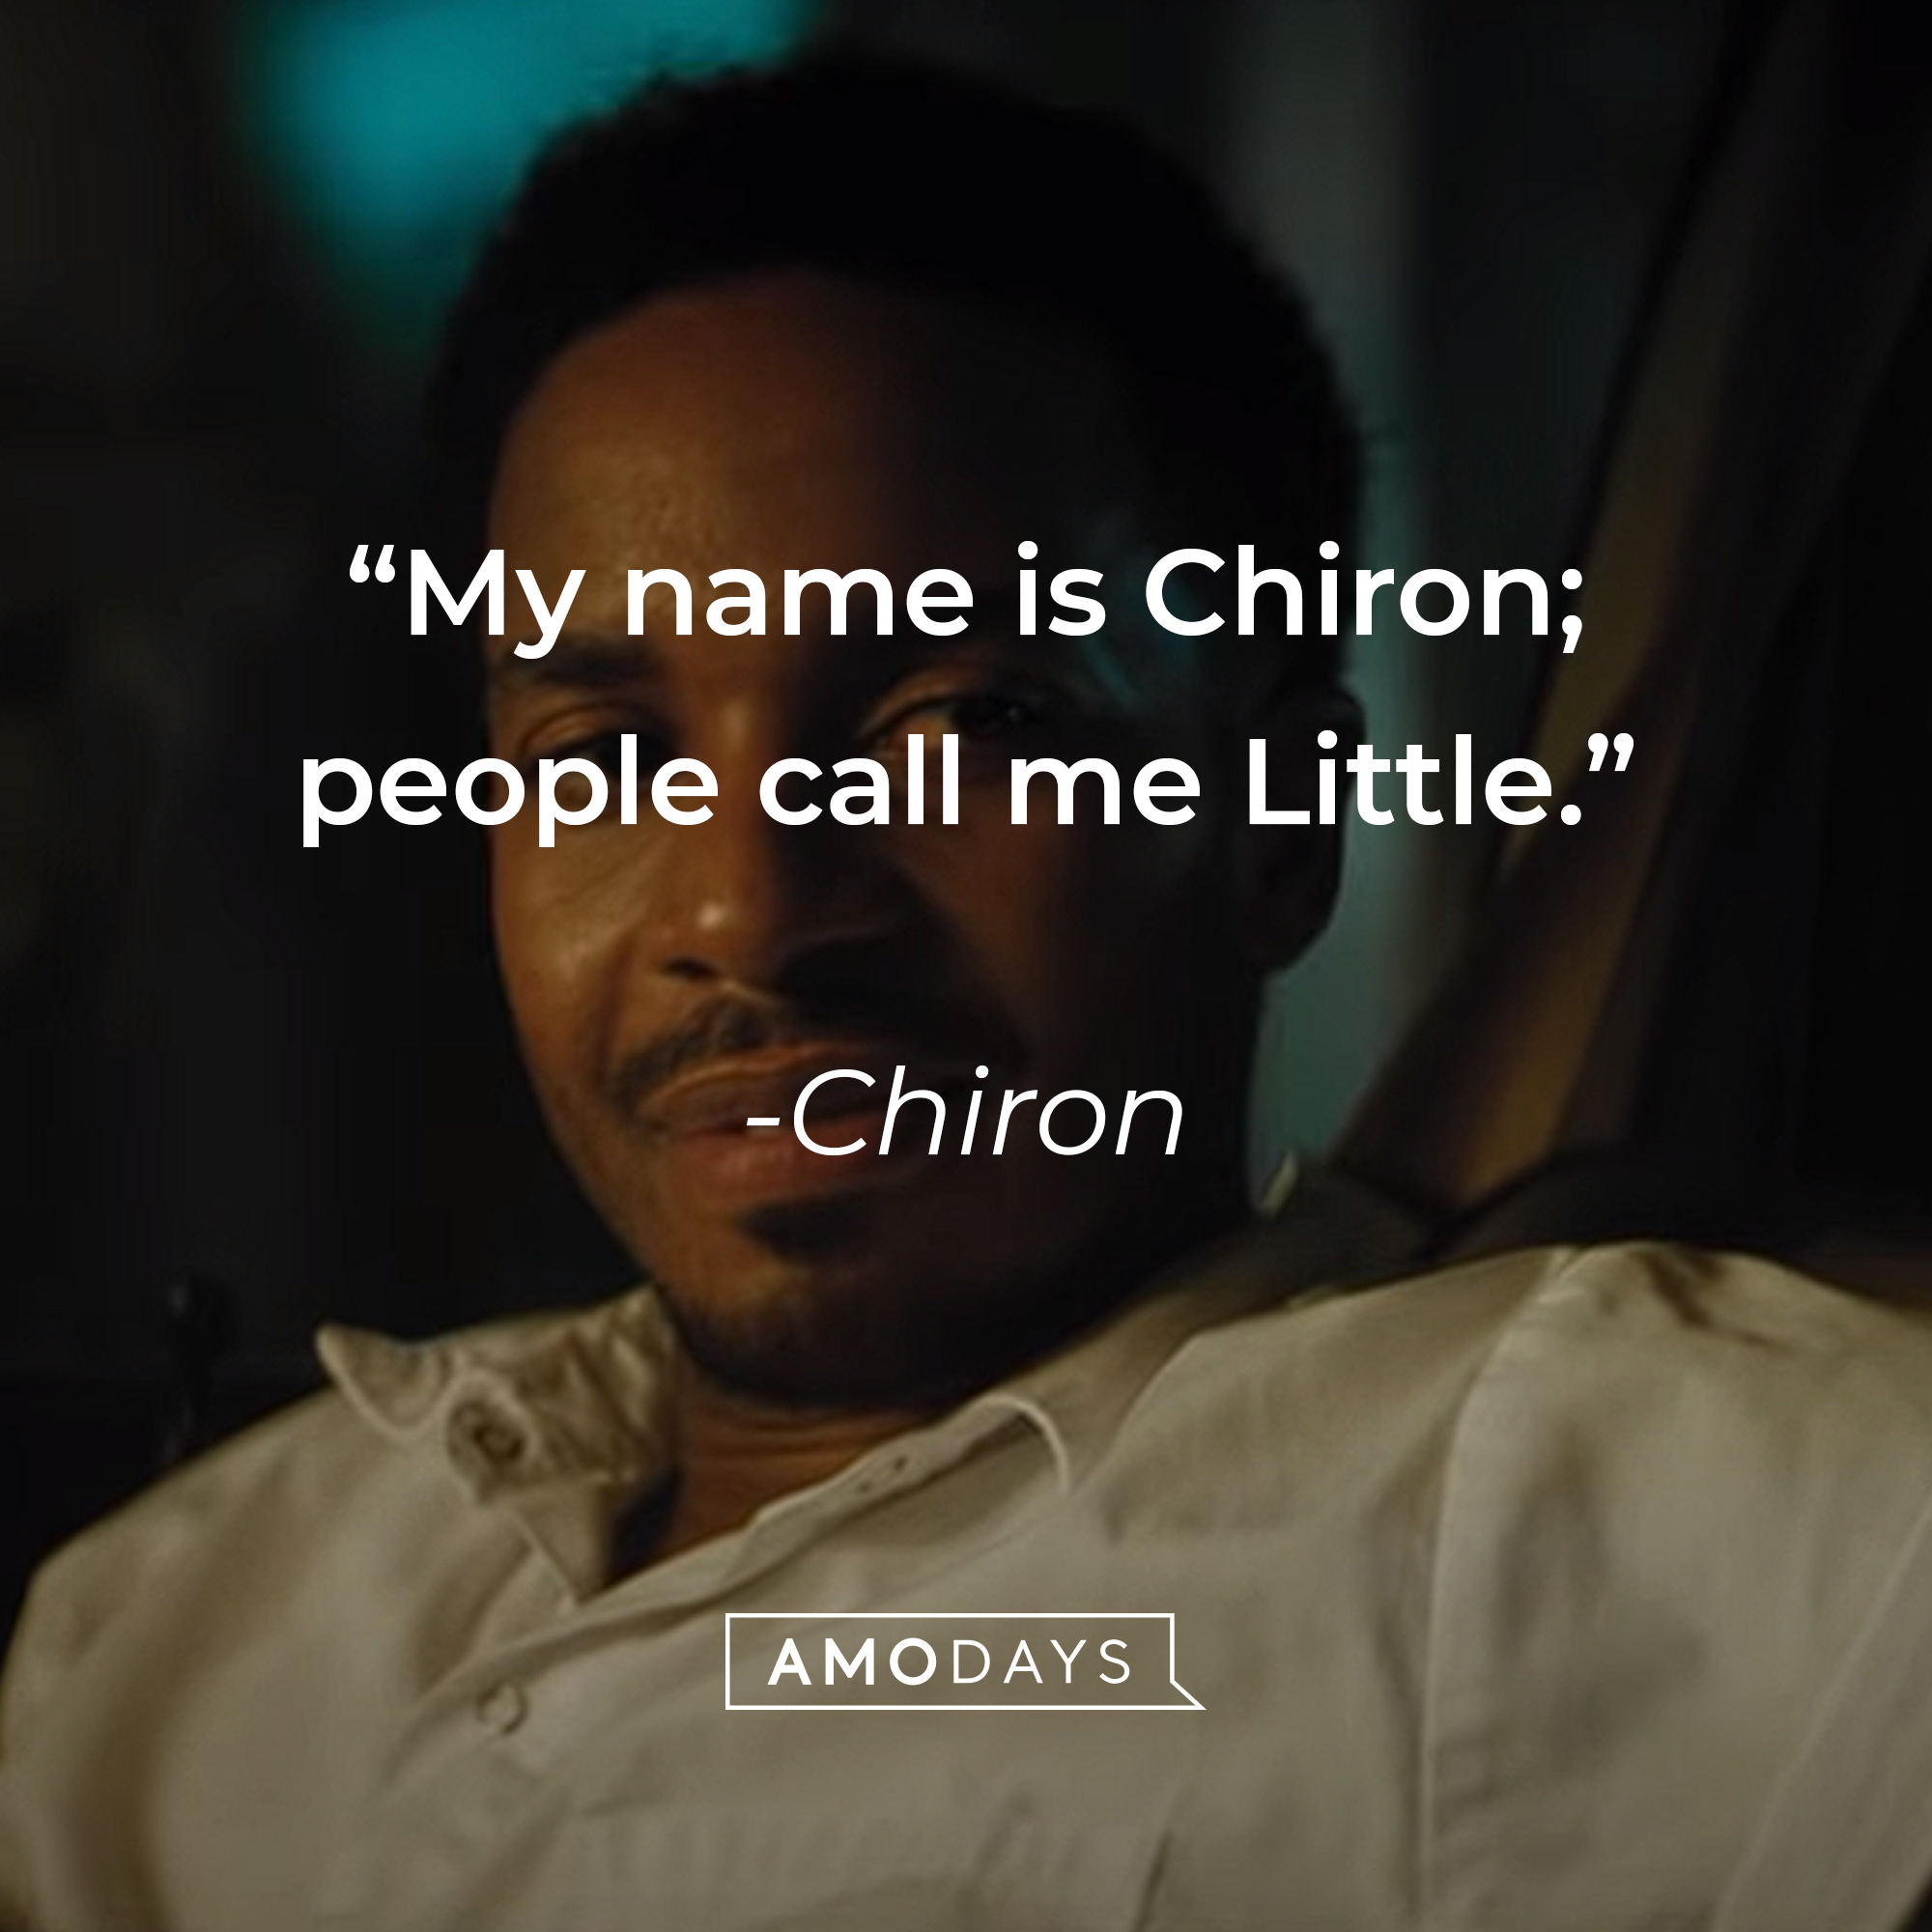 An image of Kevin with Chiron’s quote: “My name is Chiron; people call me Little.”| Source: youtube.com/A24